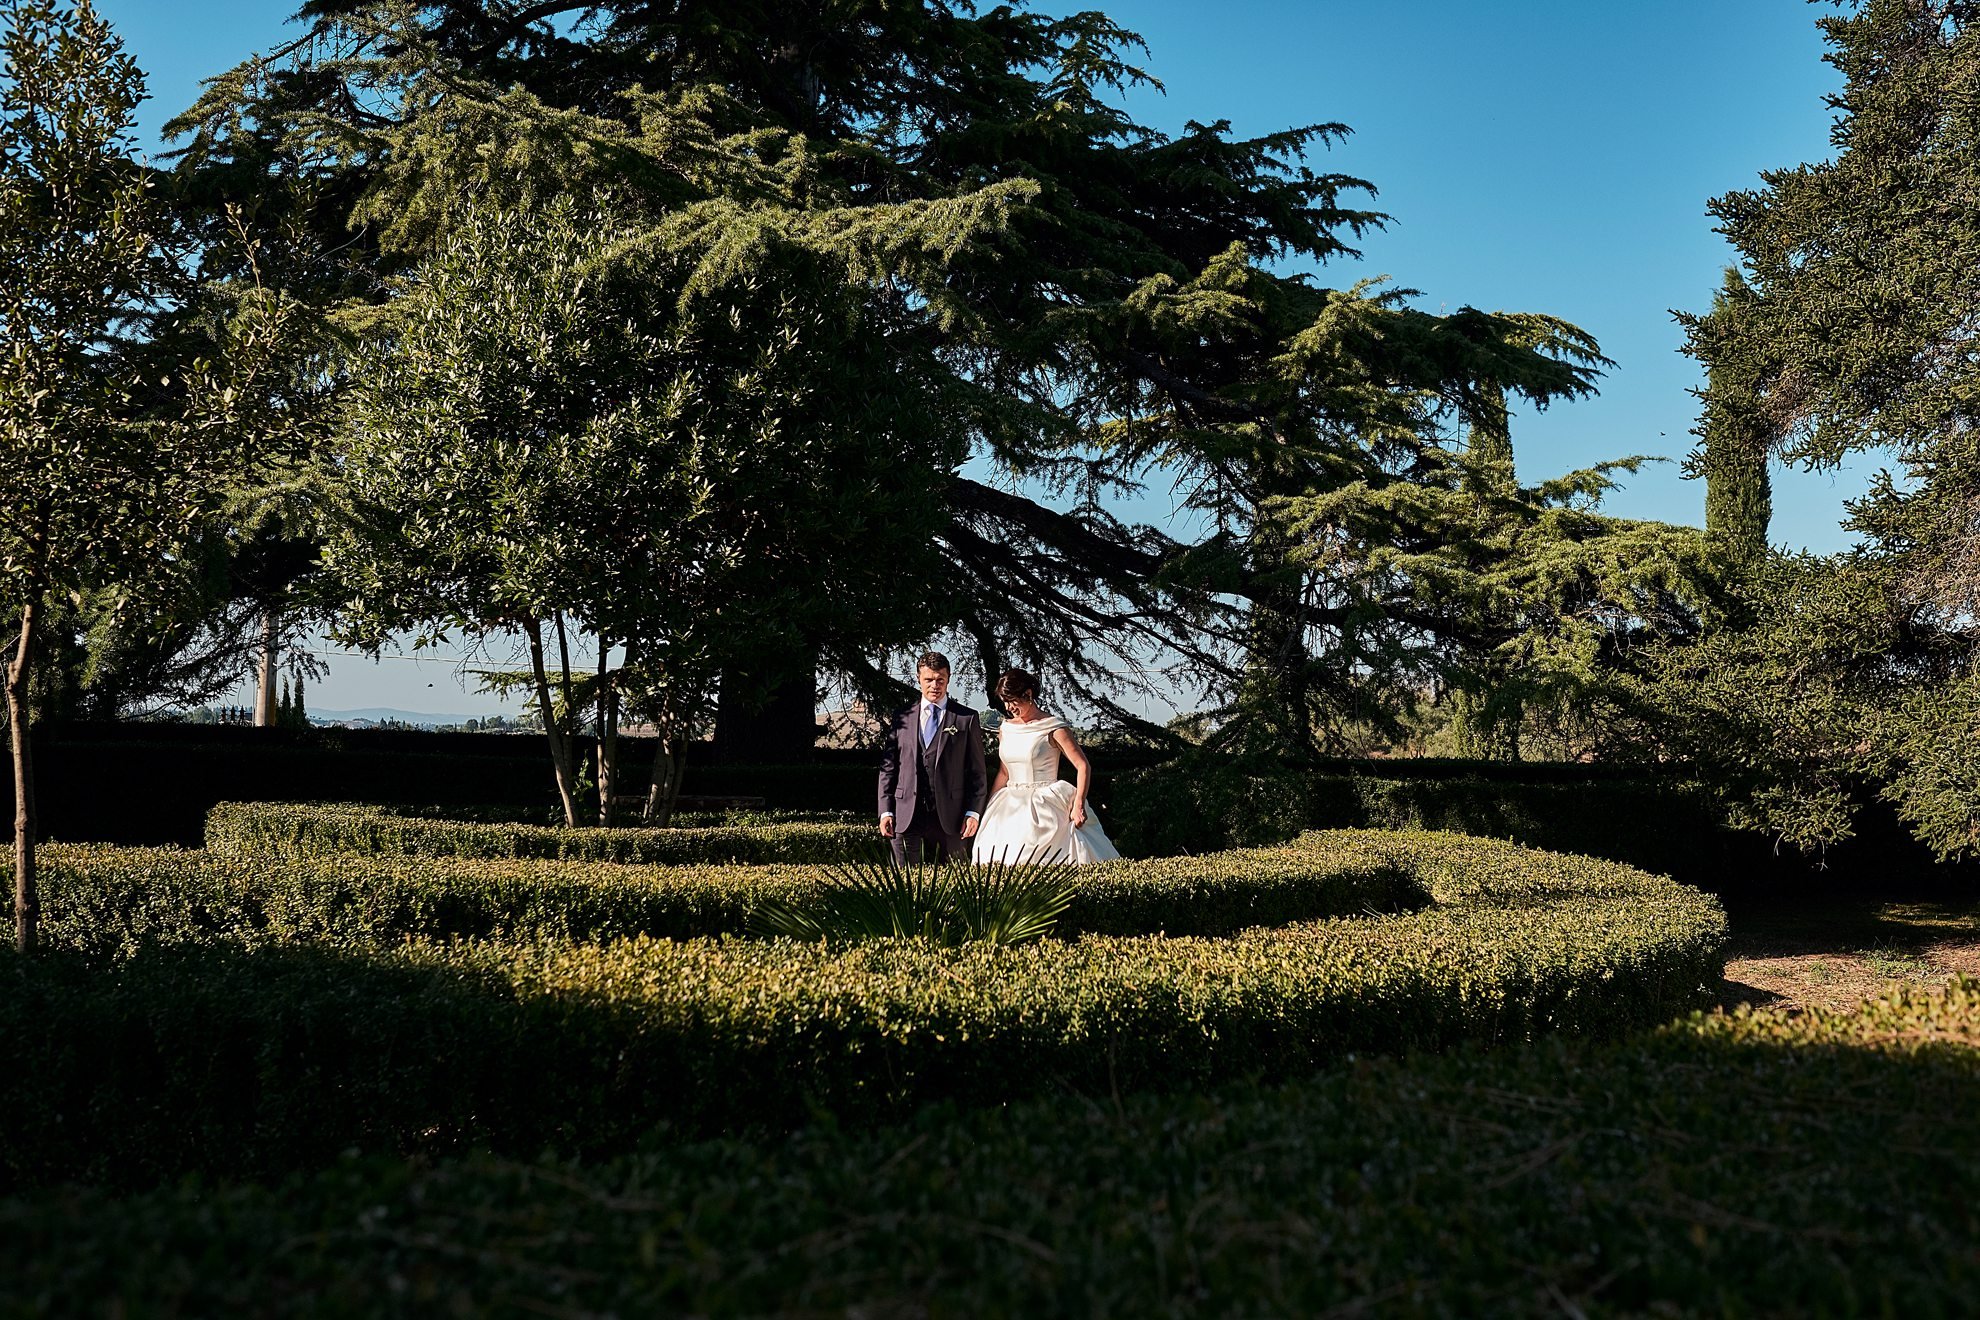  Irish destination wedding celebrated in the consistory room of a public palace in Piazza del Campo in Siena. The reception took place in the beautiful villa Chiatina of the Pometti company, in the municipality of Buonconvento on the border with Asci